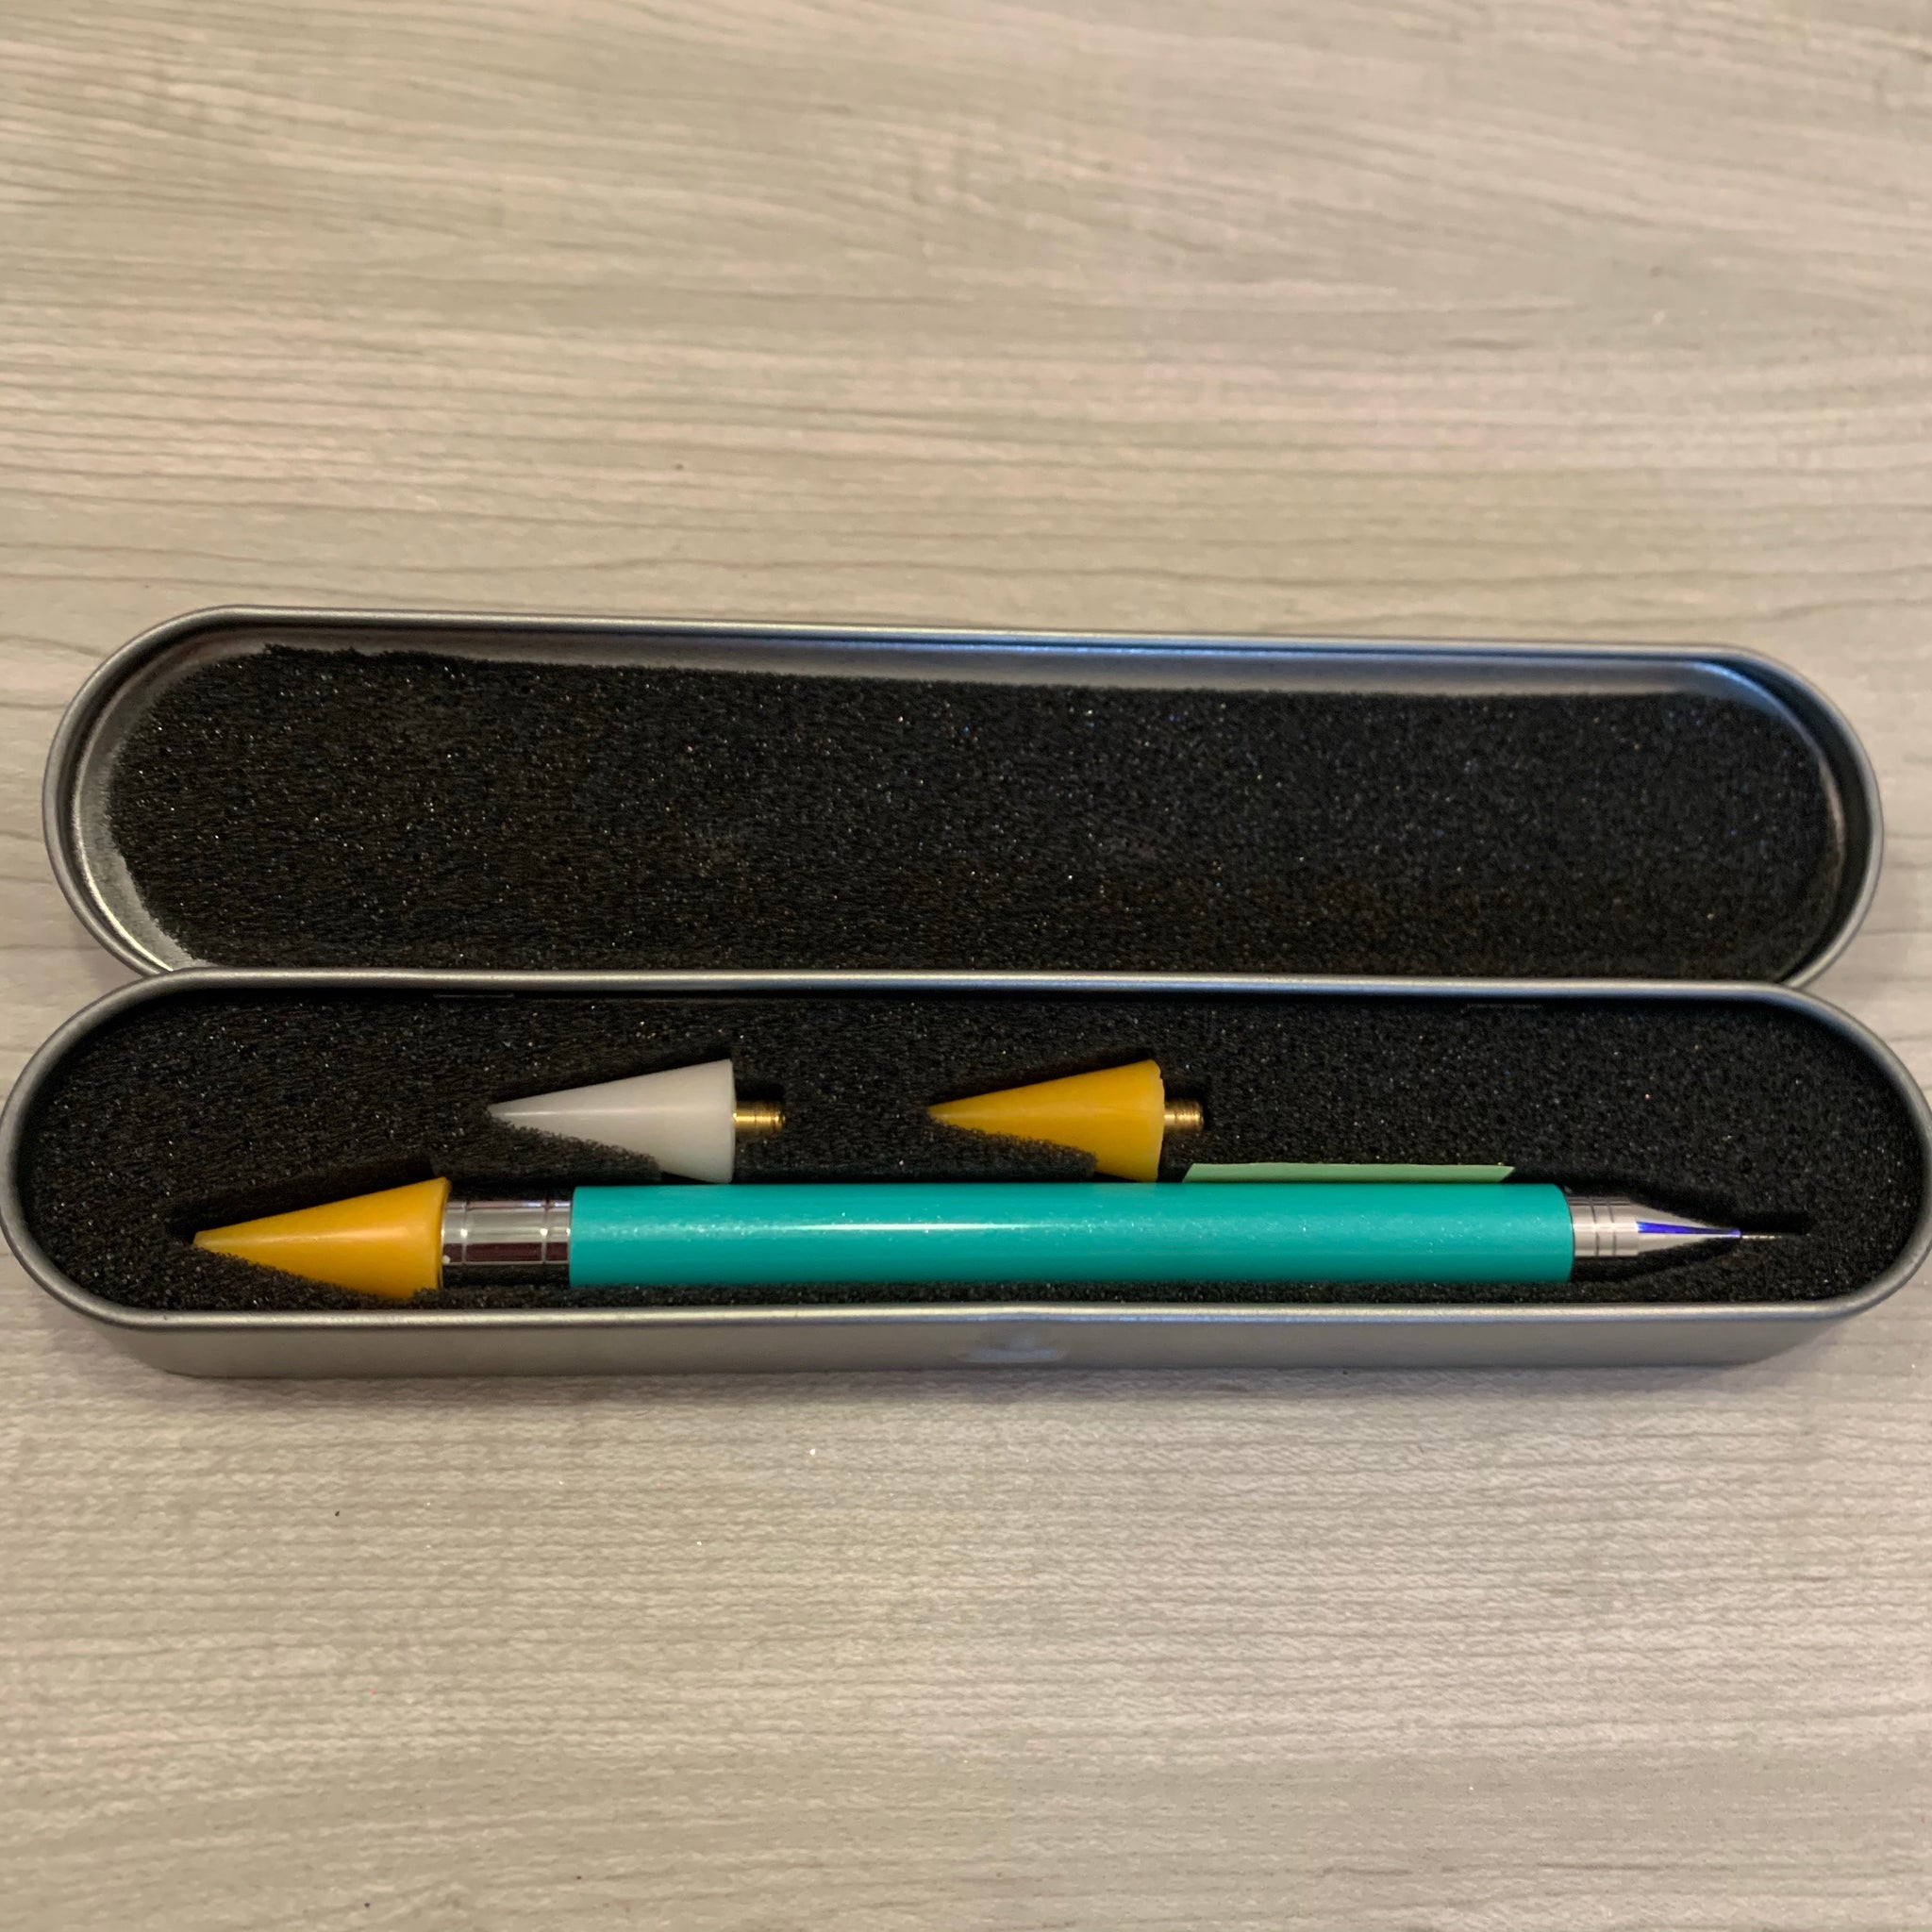 Wax pencil in Case with replacement wax